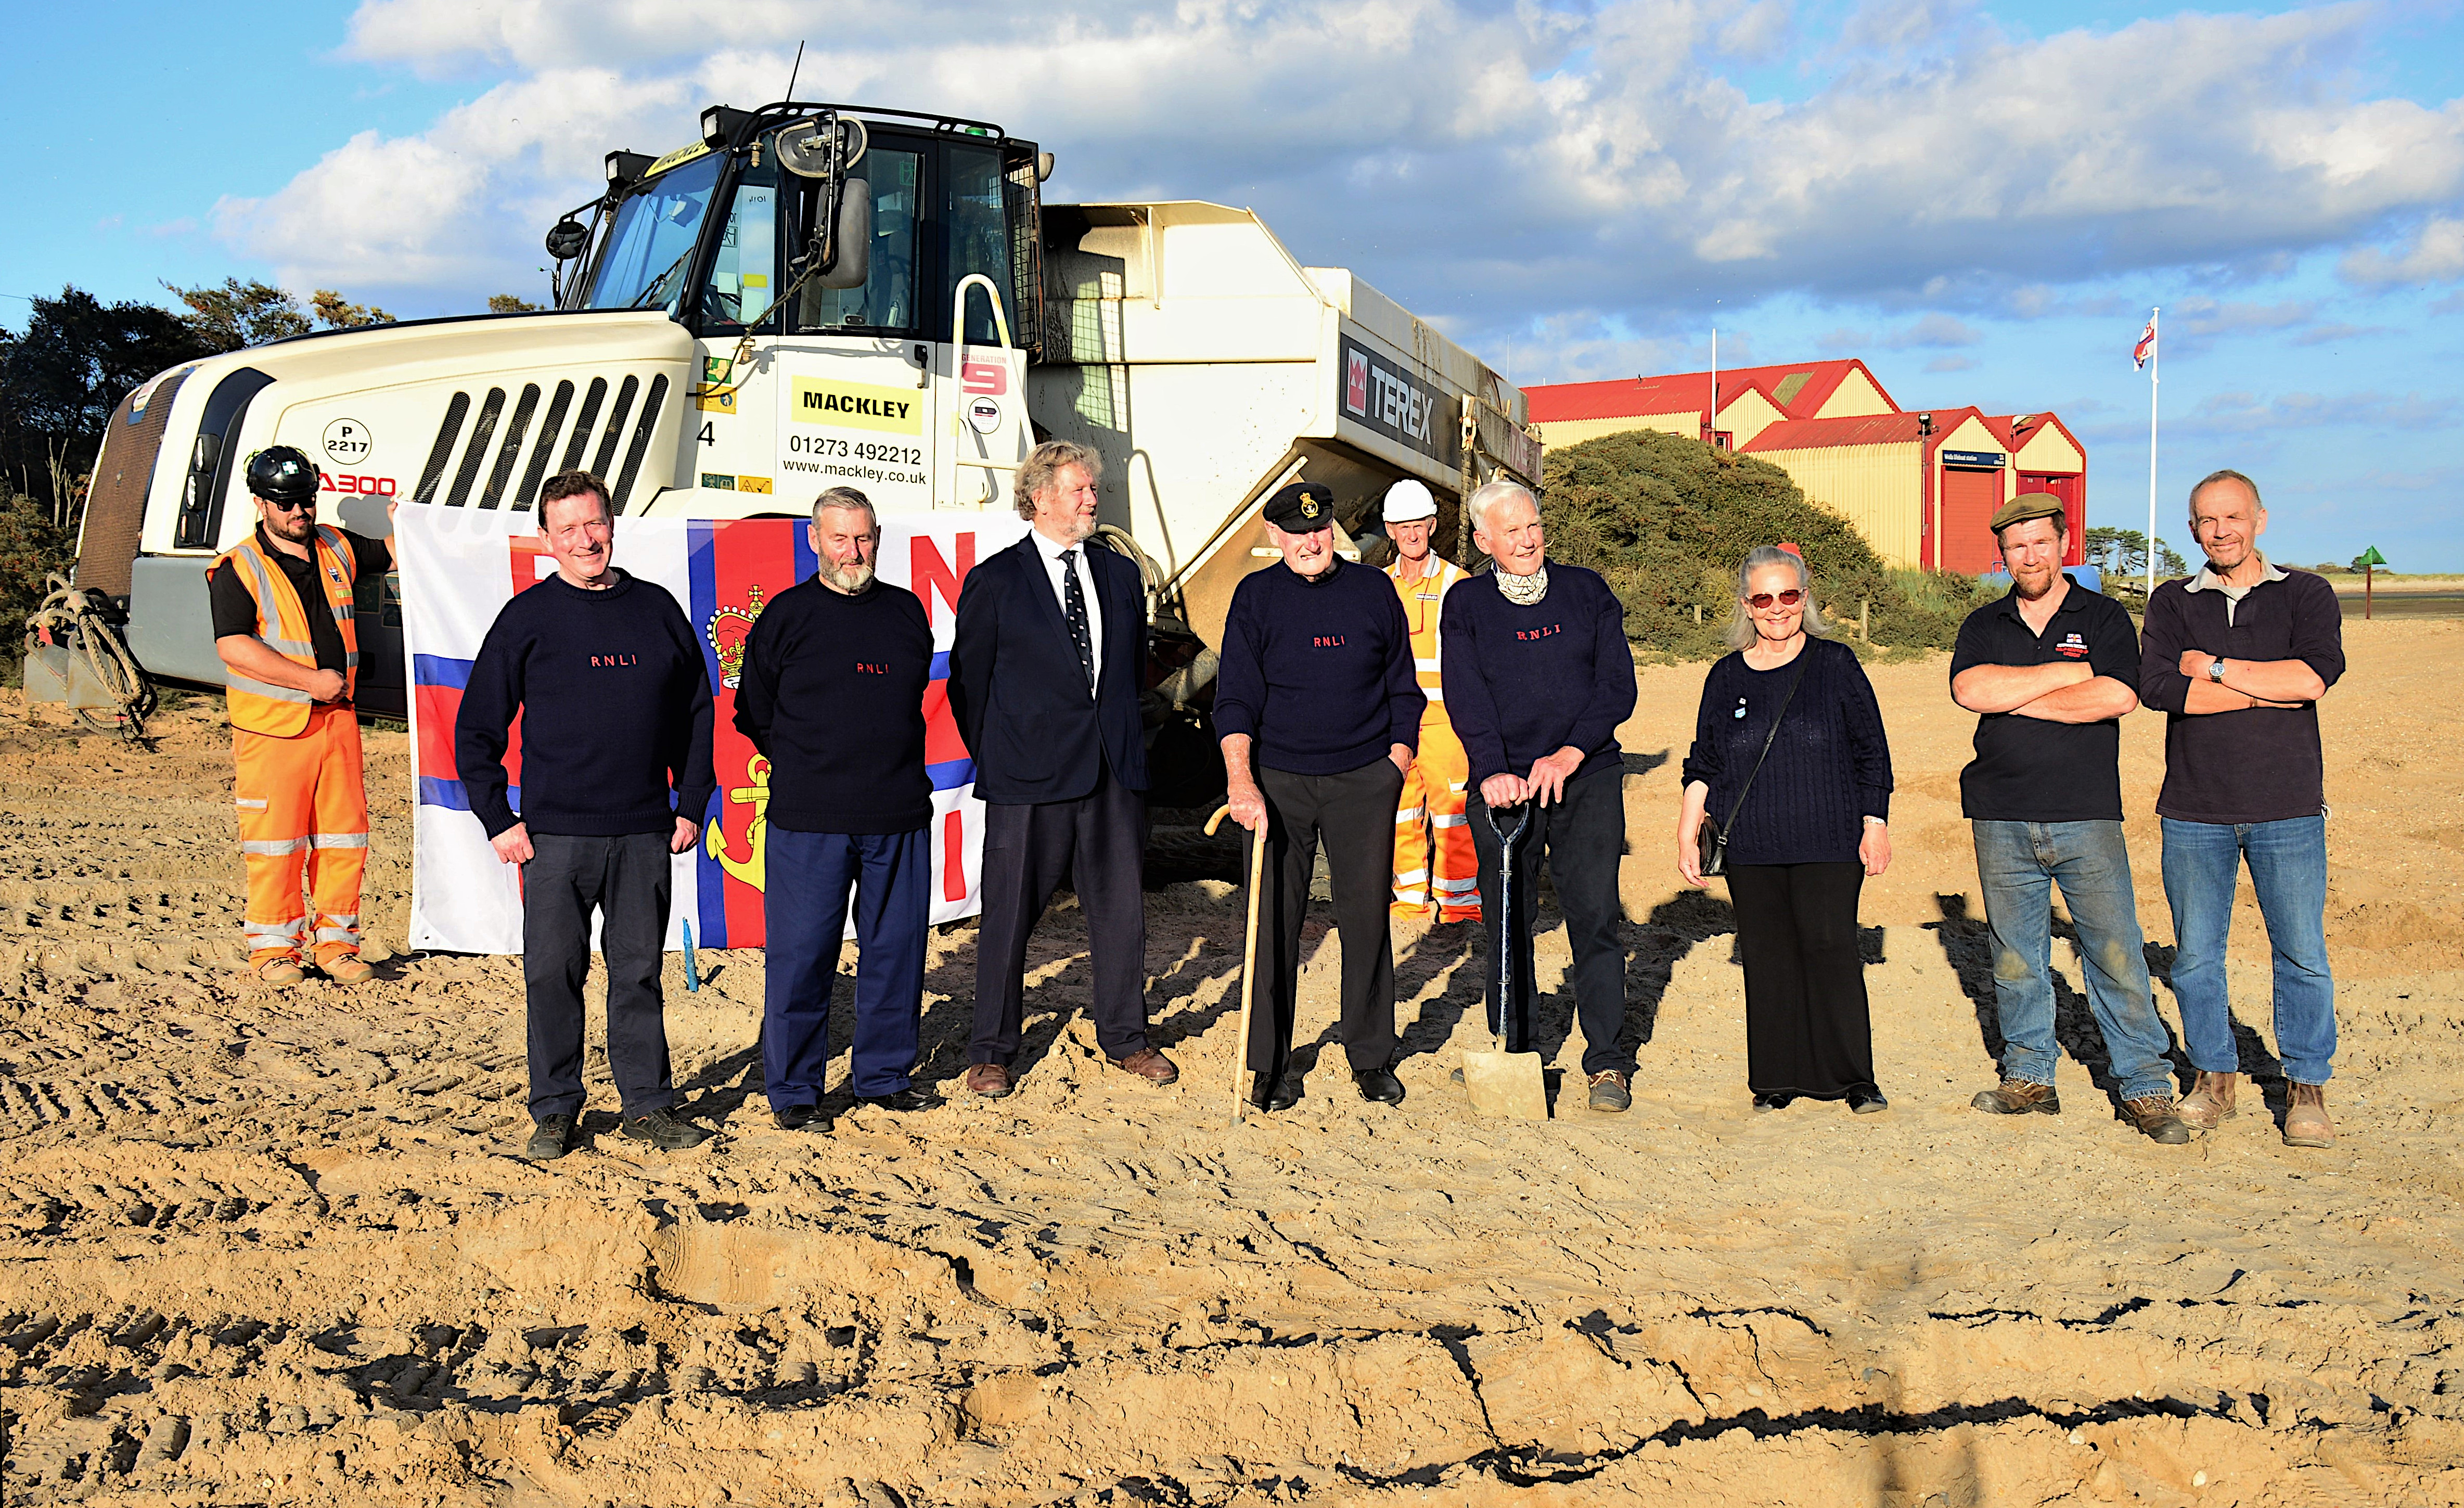 Lifeboat crew and management volunteers on the beach at the start of building work